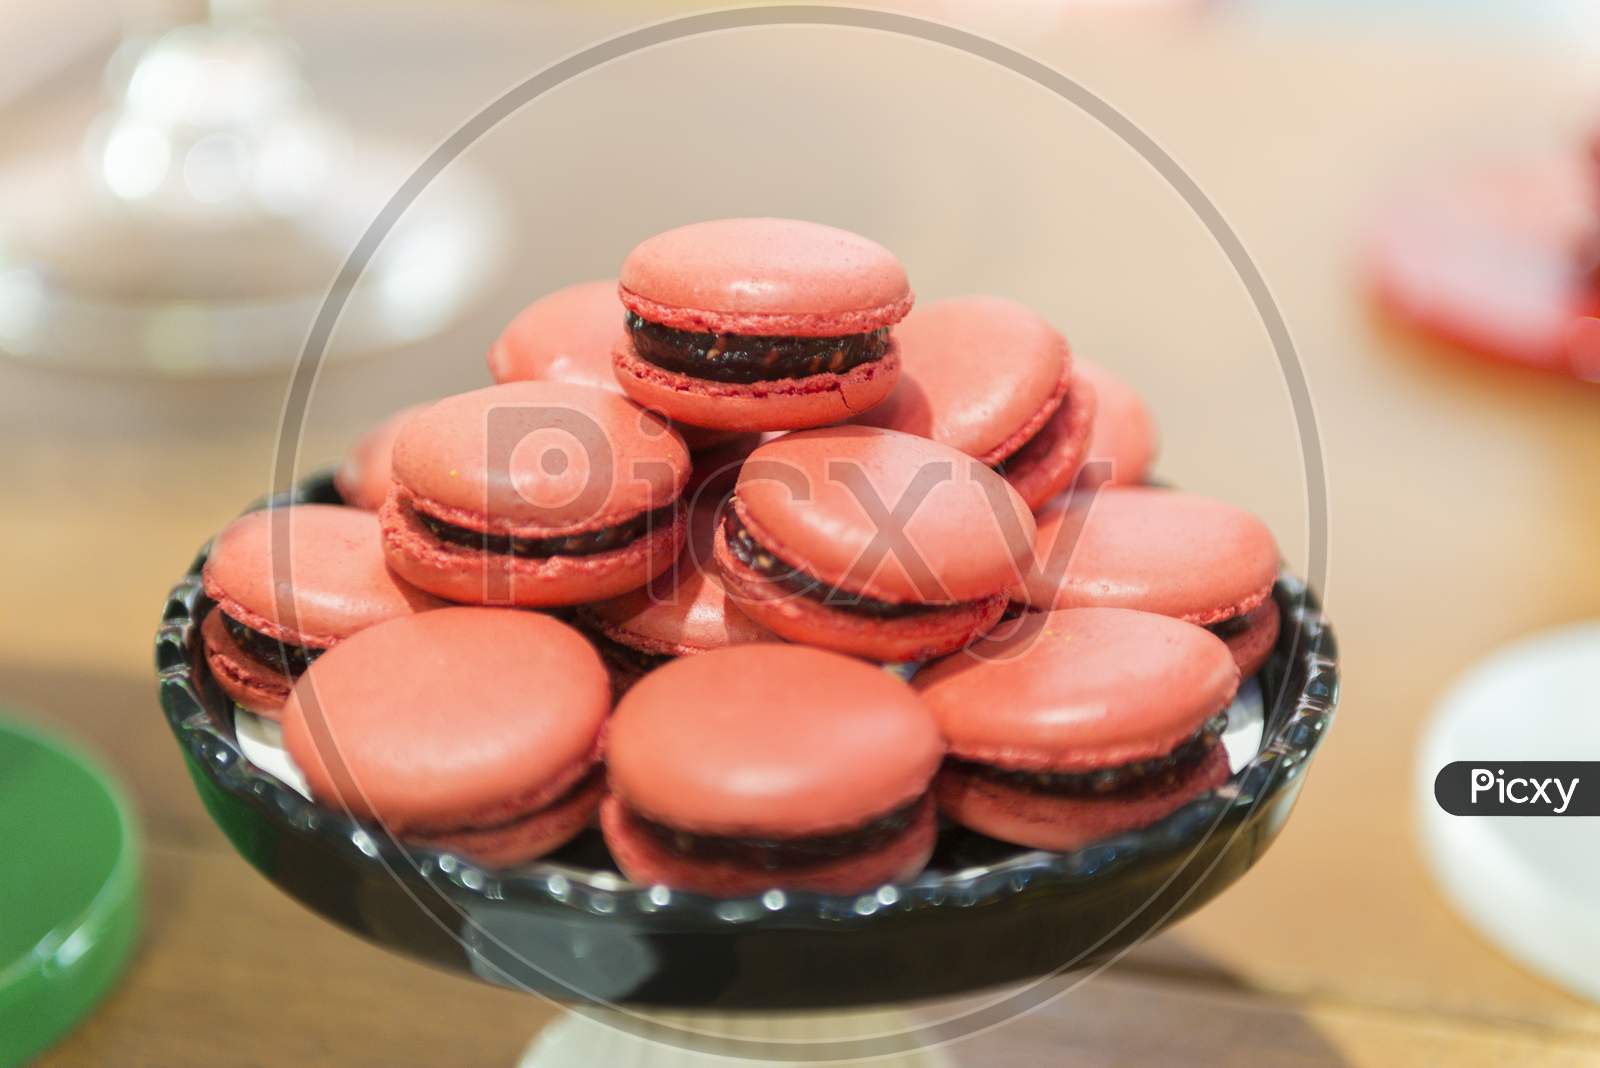 Several Red Macaroons On A Black Ceramic Tray.